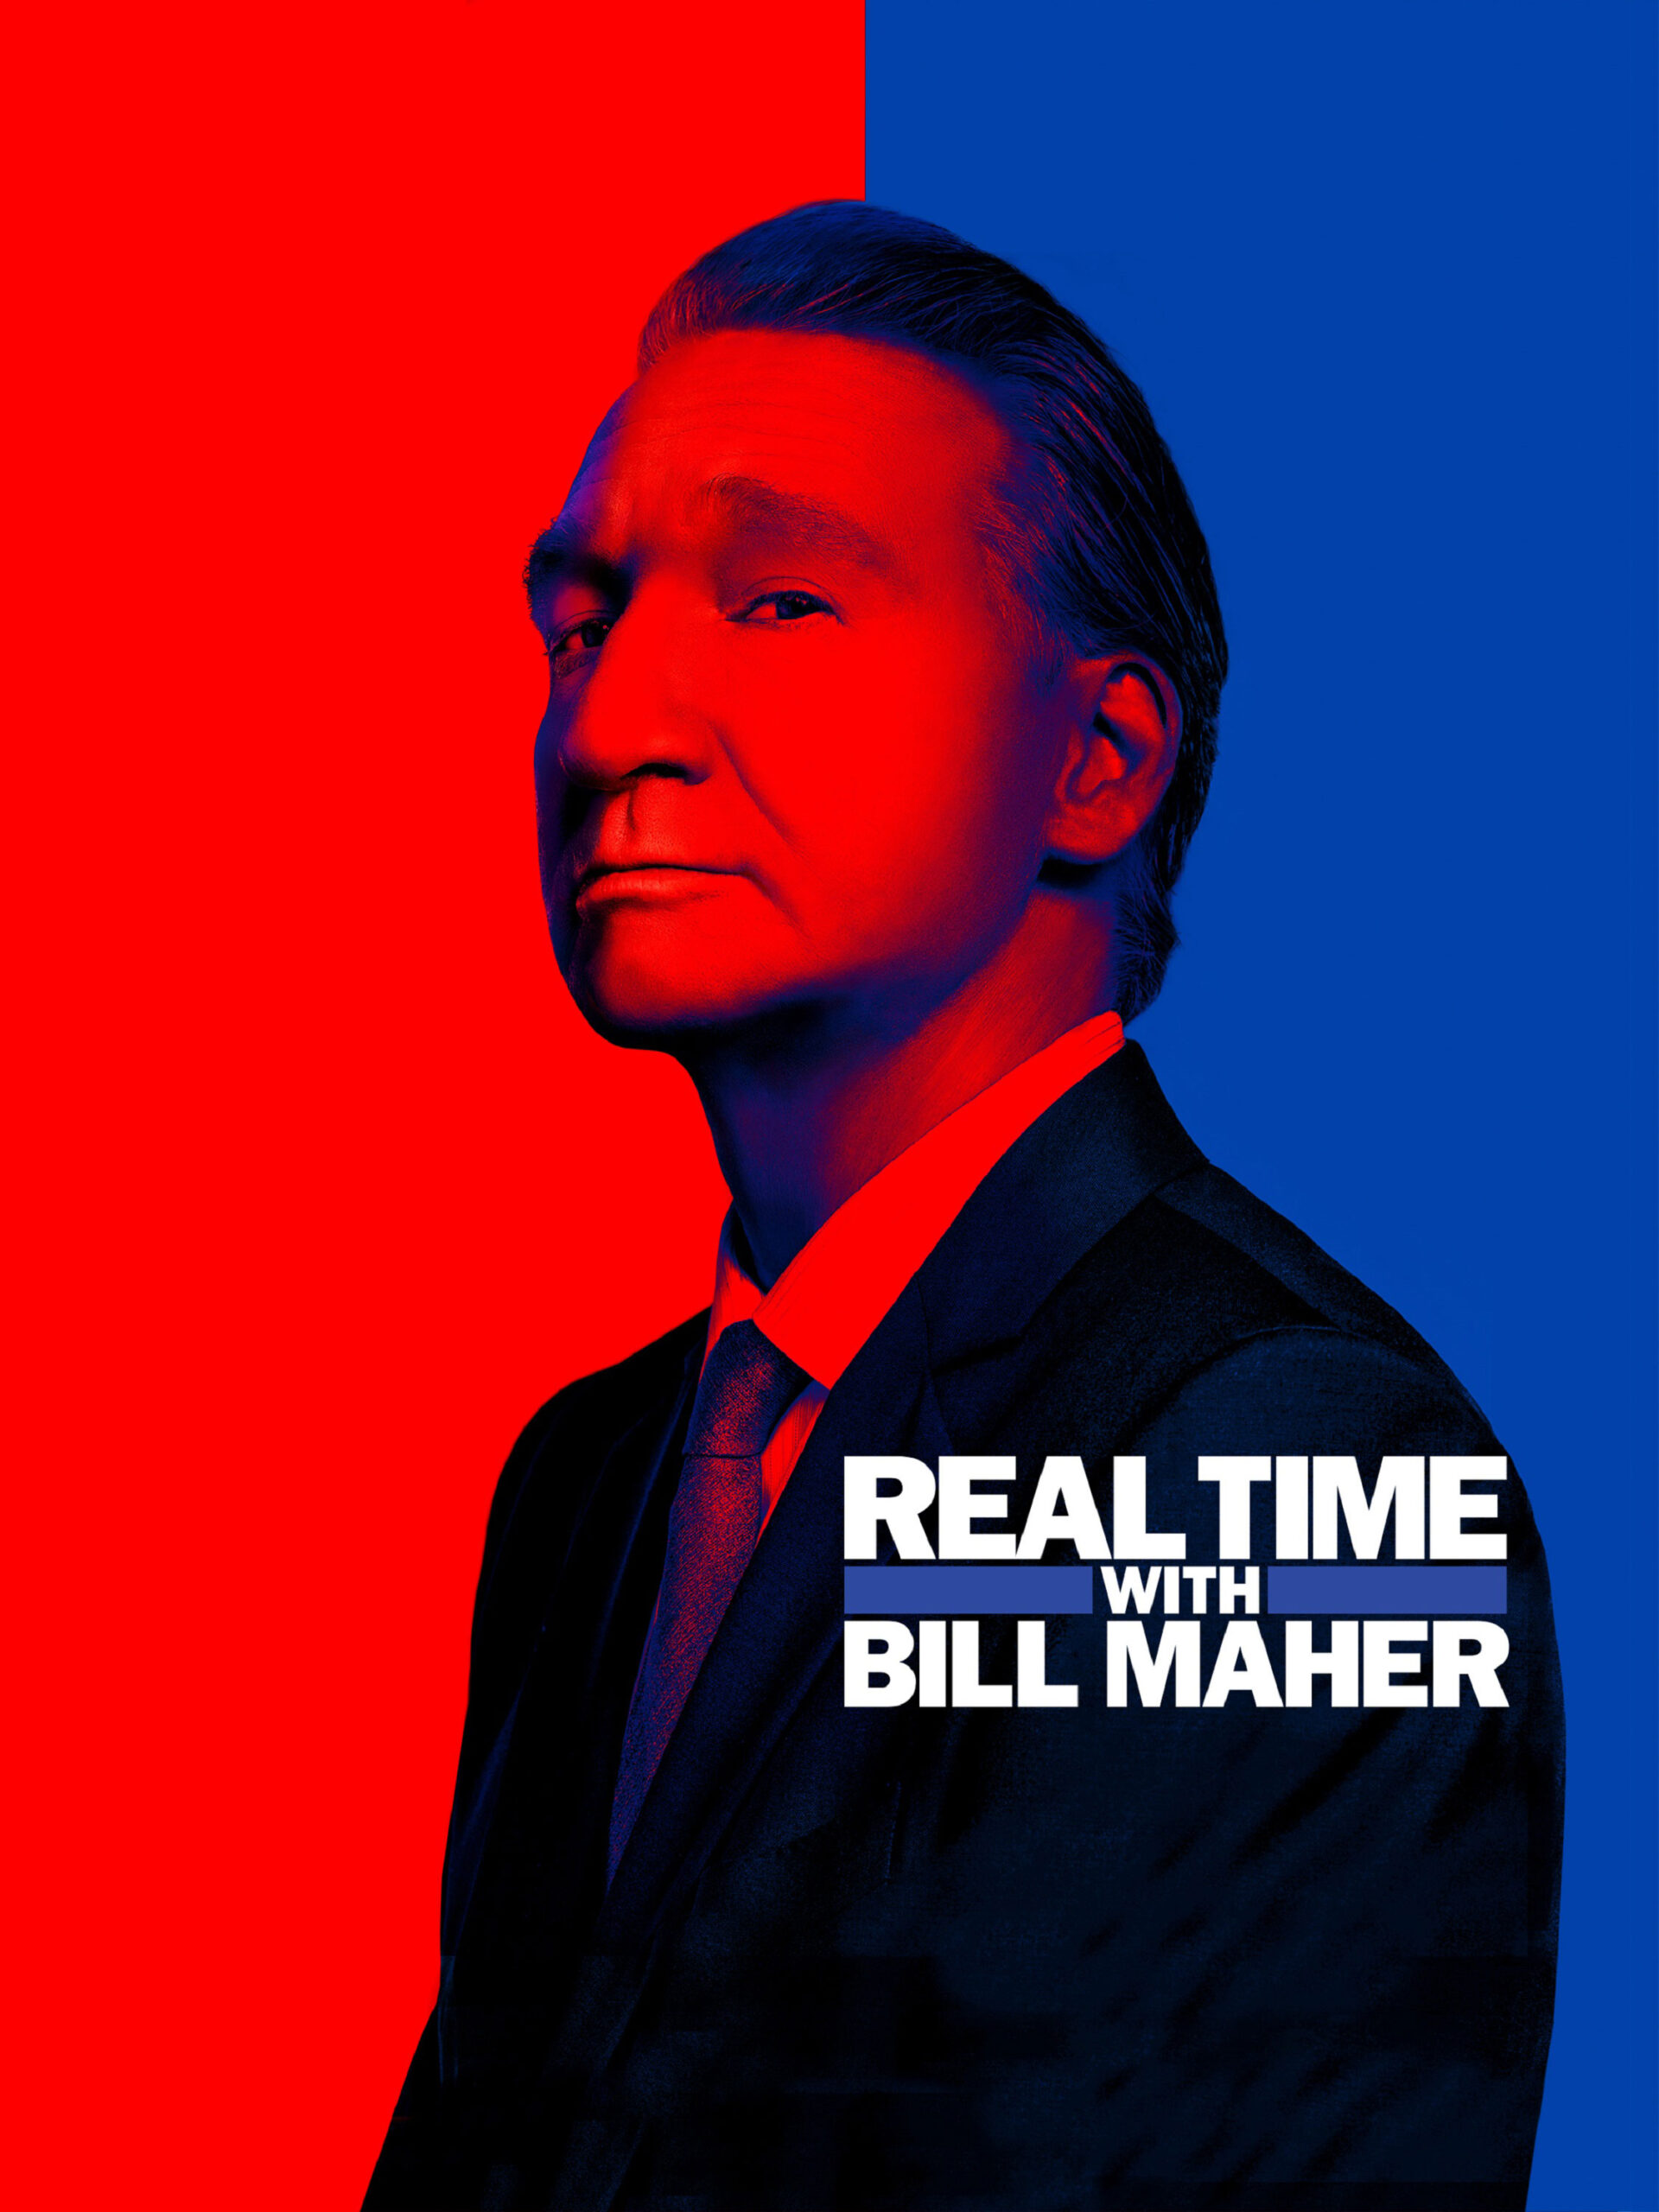 REAL TIME WITH BILL MAHER January 26 Episode Lineup